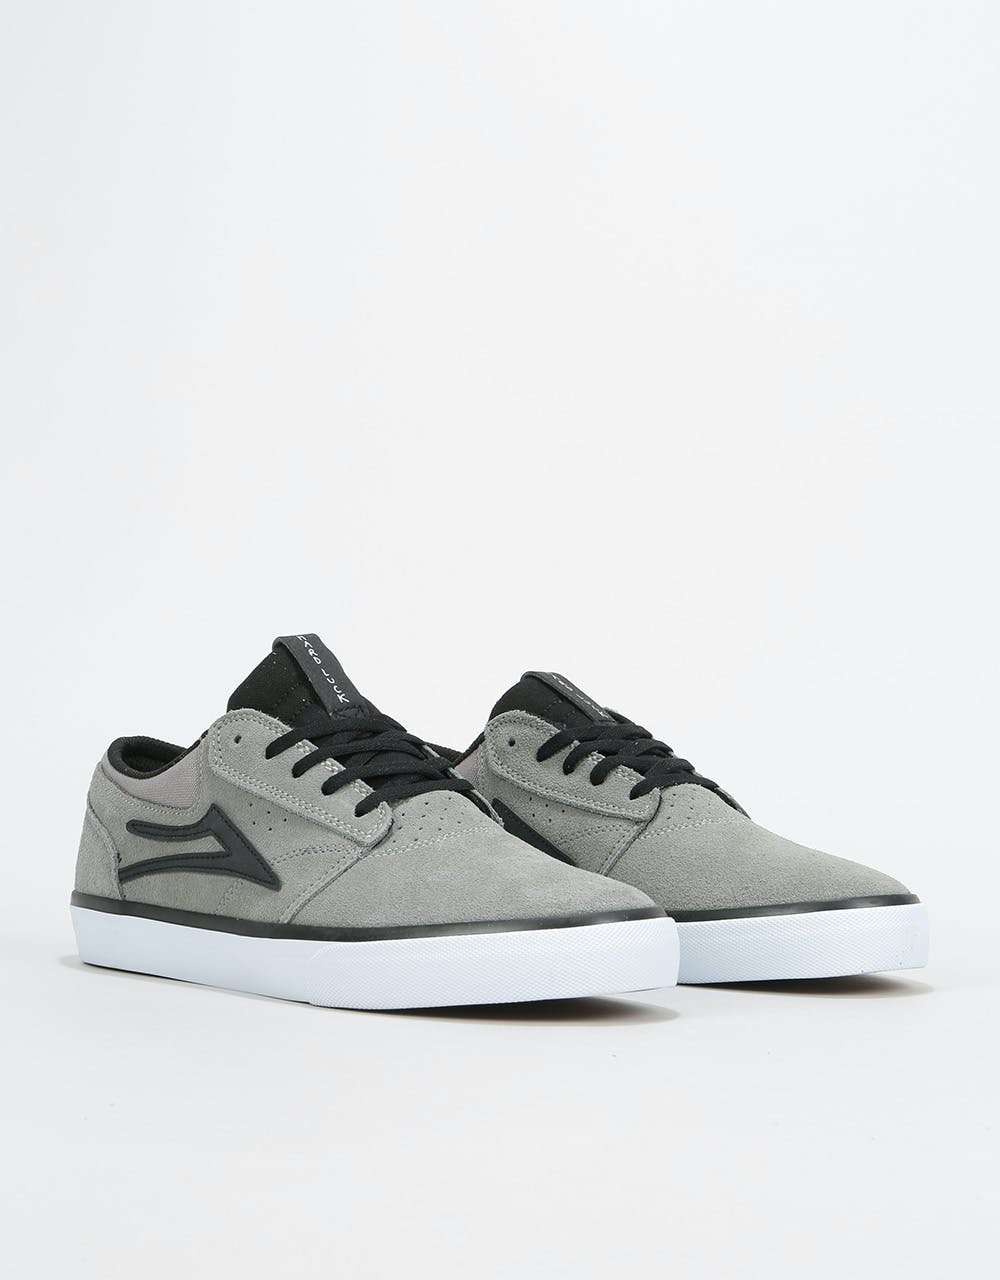 Lakai x Hard Luck Griffin Skate Shoes - Grey/Black Suede